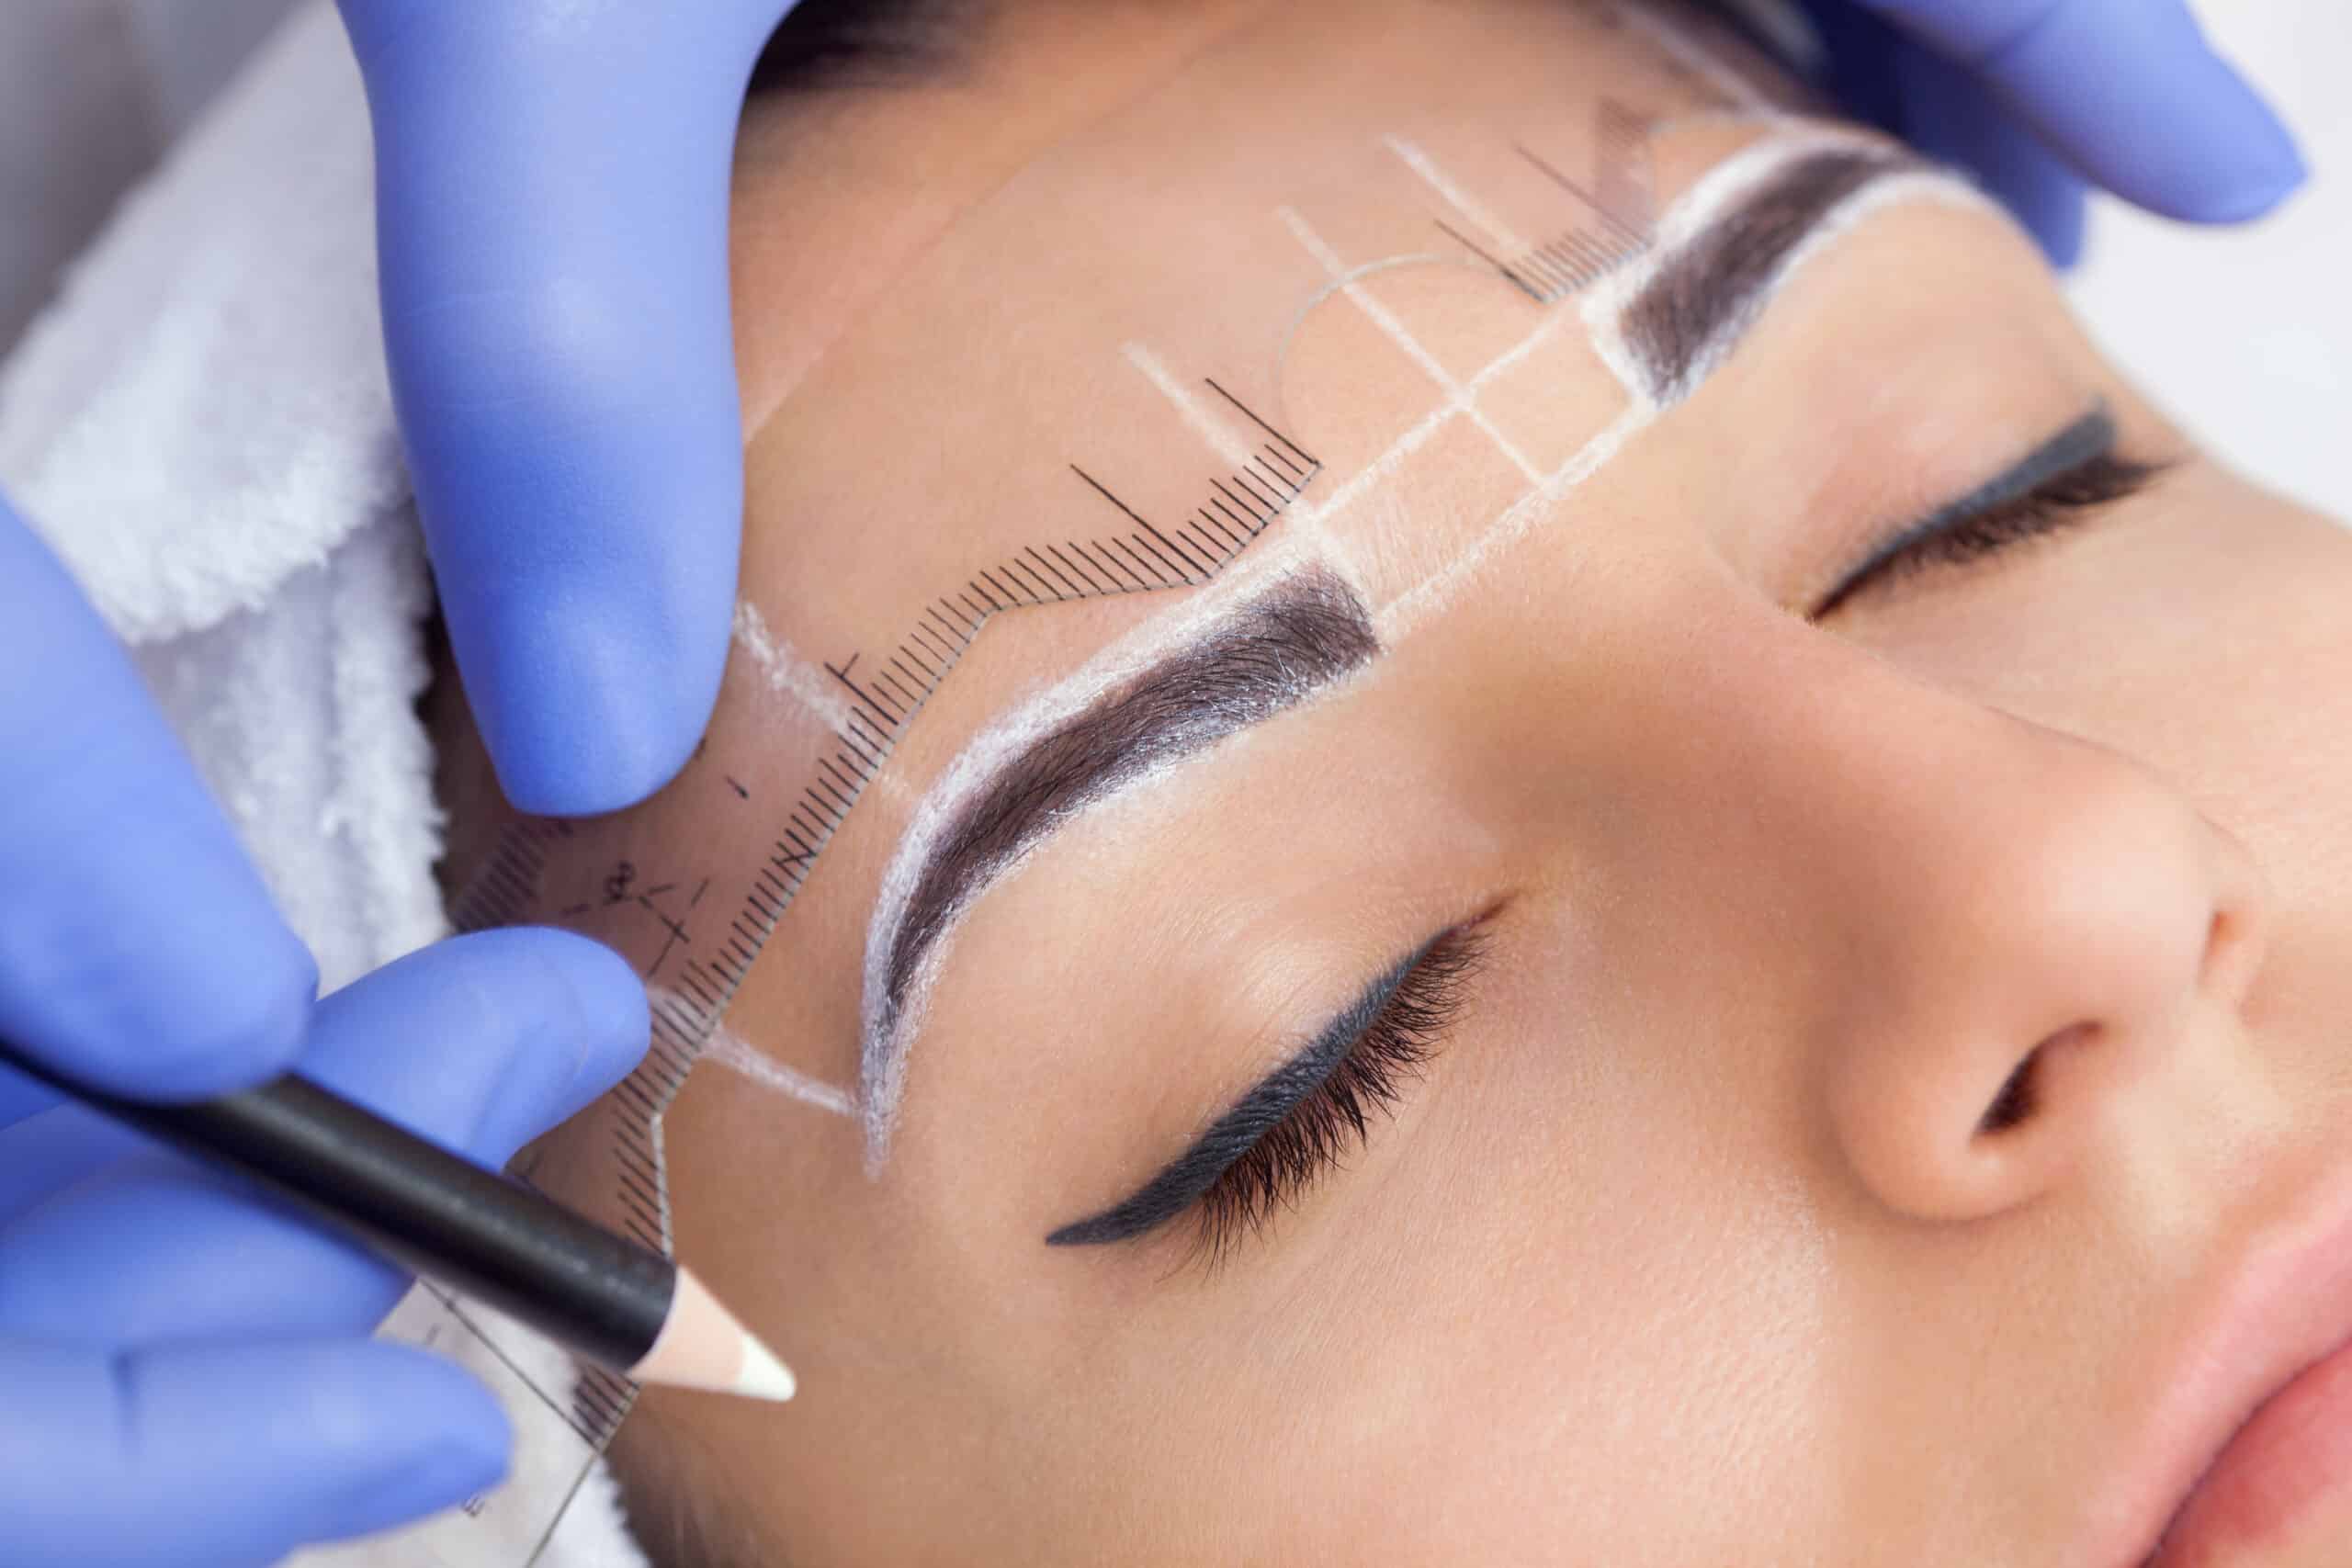 The Art and Science of Microblading Techniques, Trends, and Safety